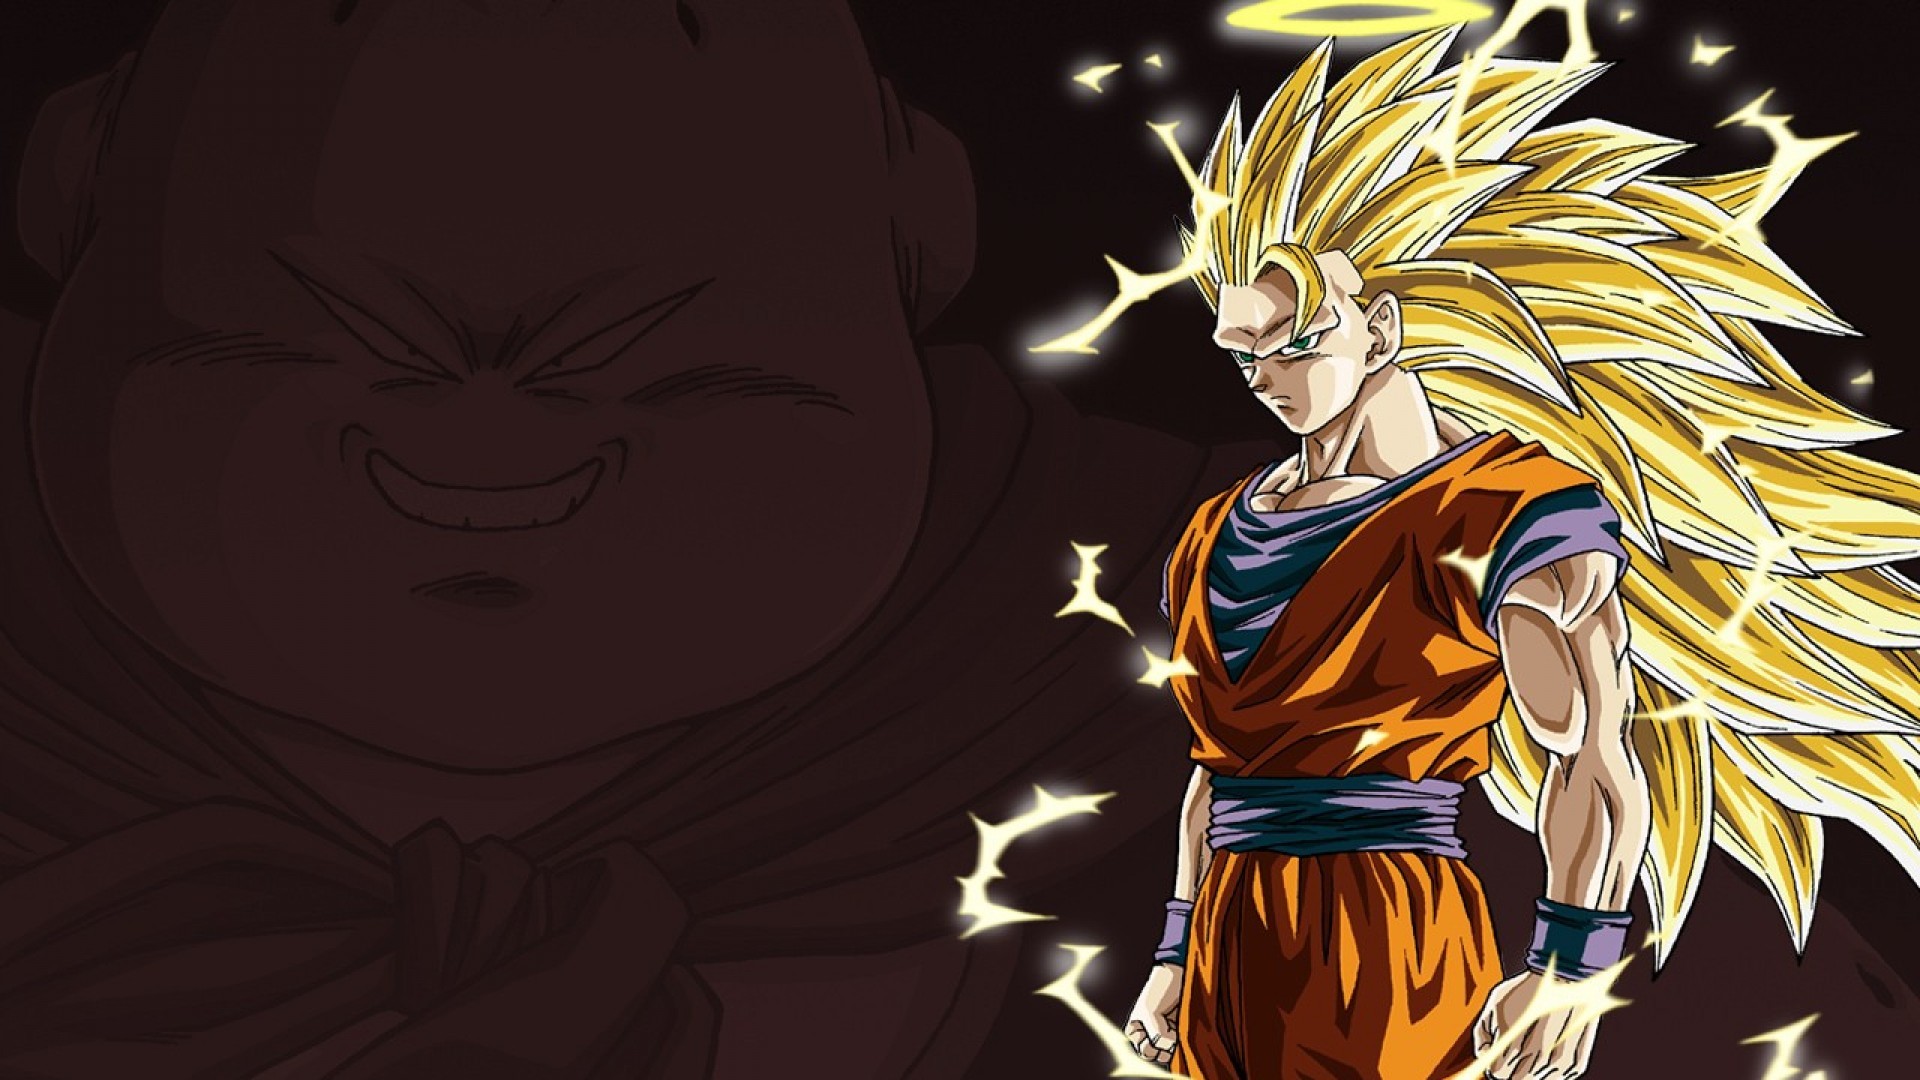 Dragonball Z Wallpaper Collection 1440900 Dbz Wallpapers 34 Wallpapers Adorable Wallpapers